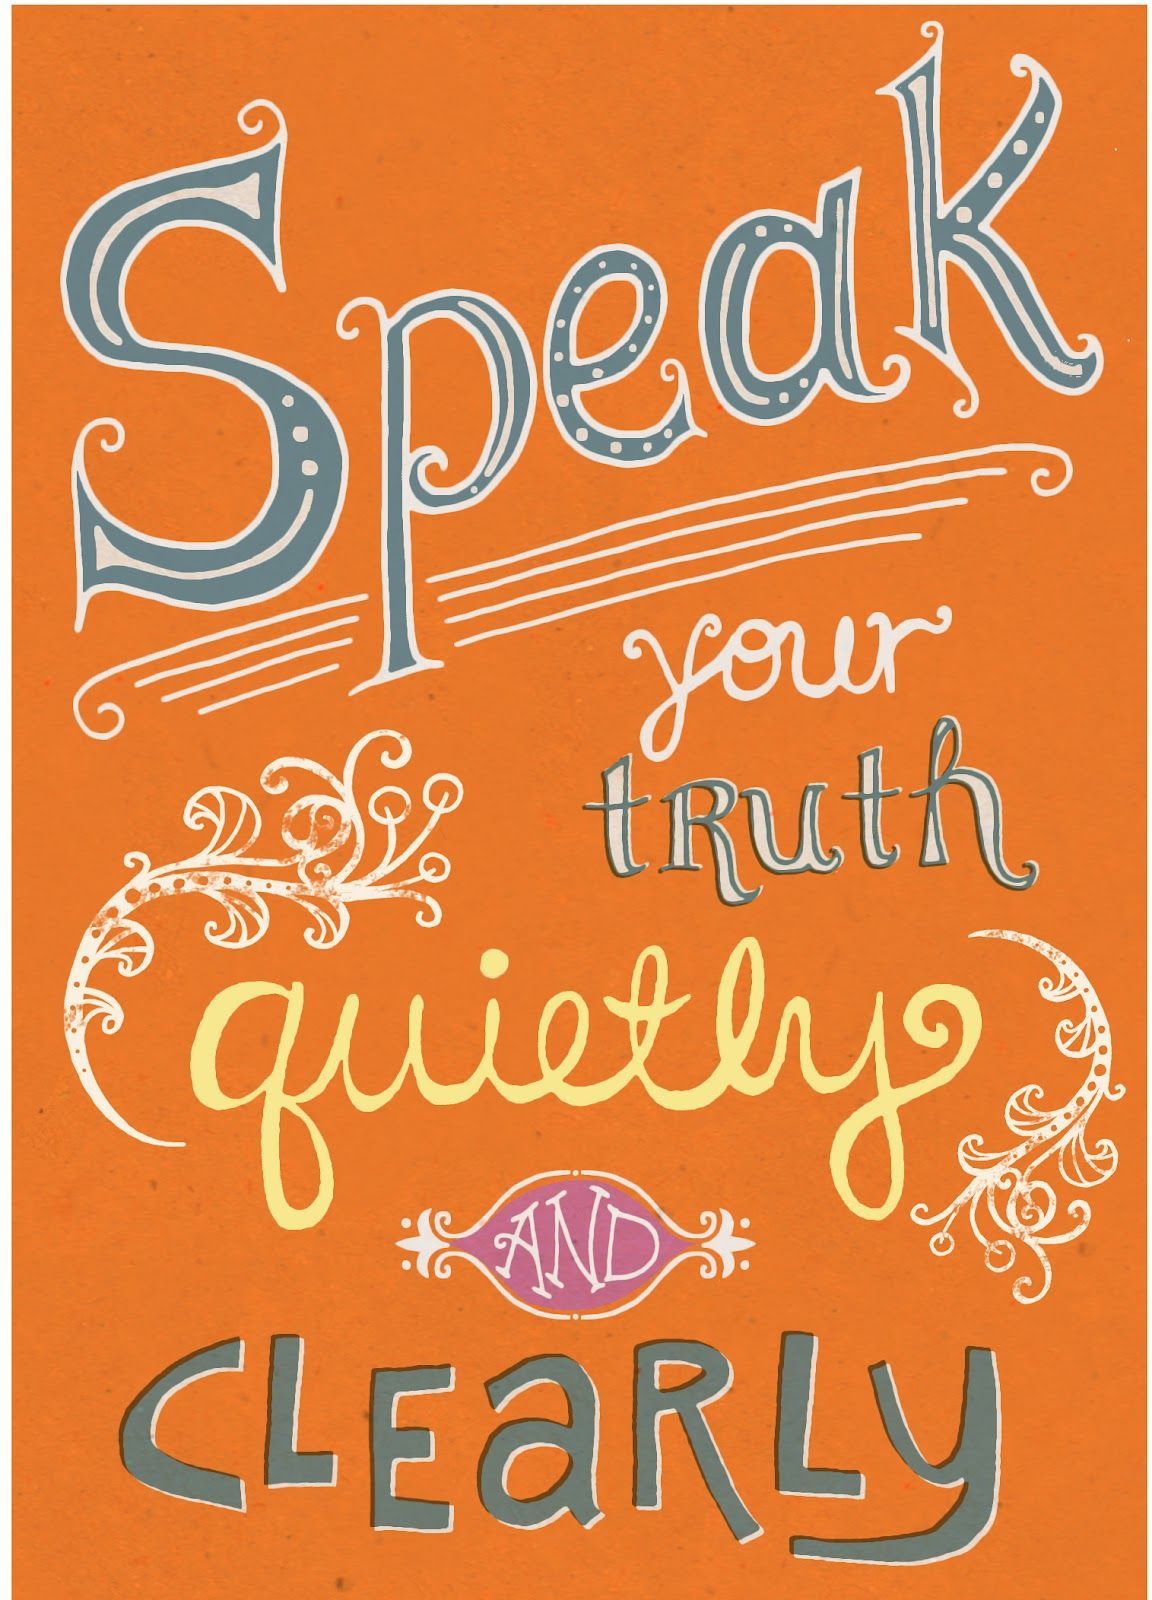 (From the Desiderata) Speak your truth quietly and clearly.